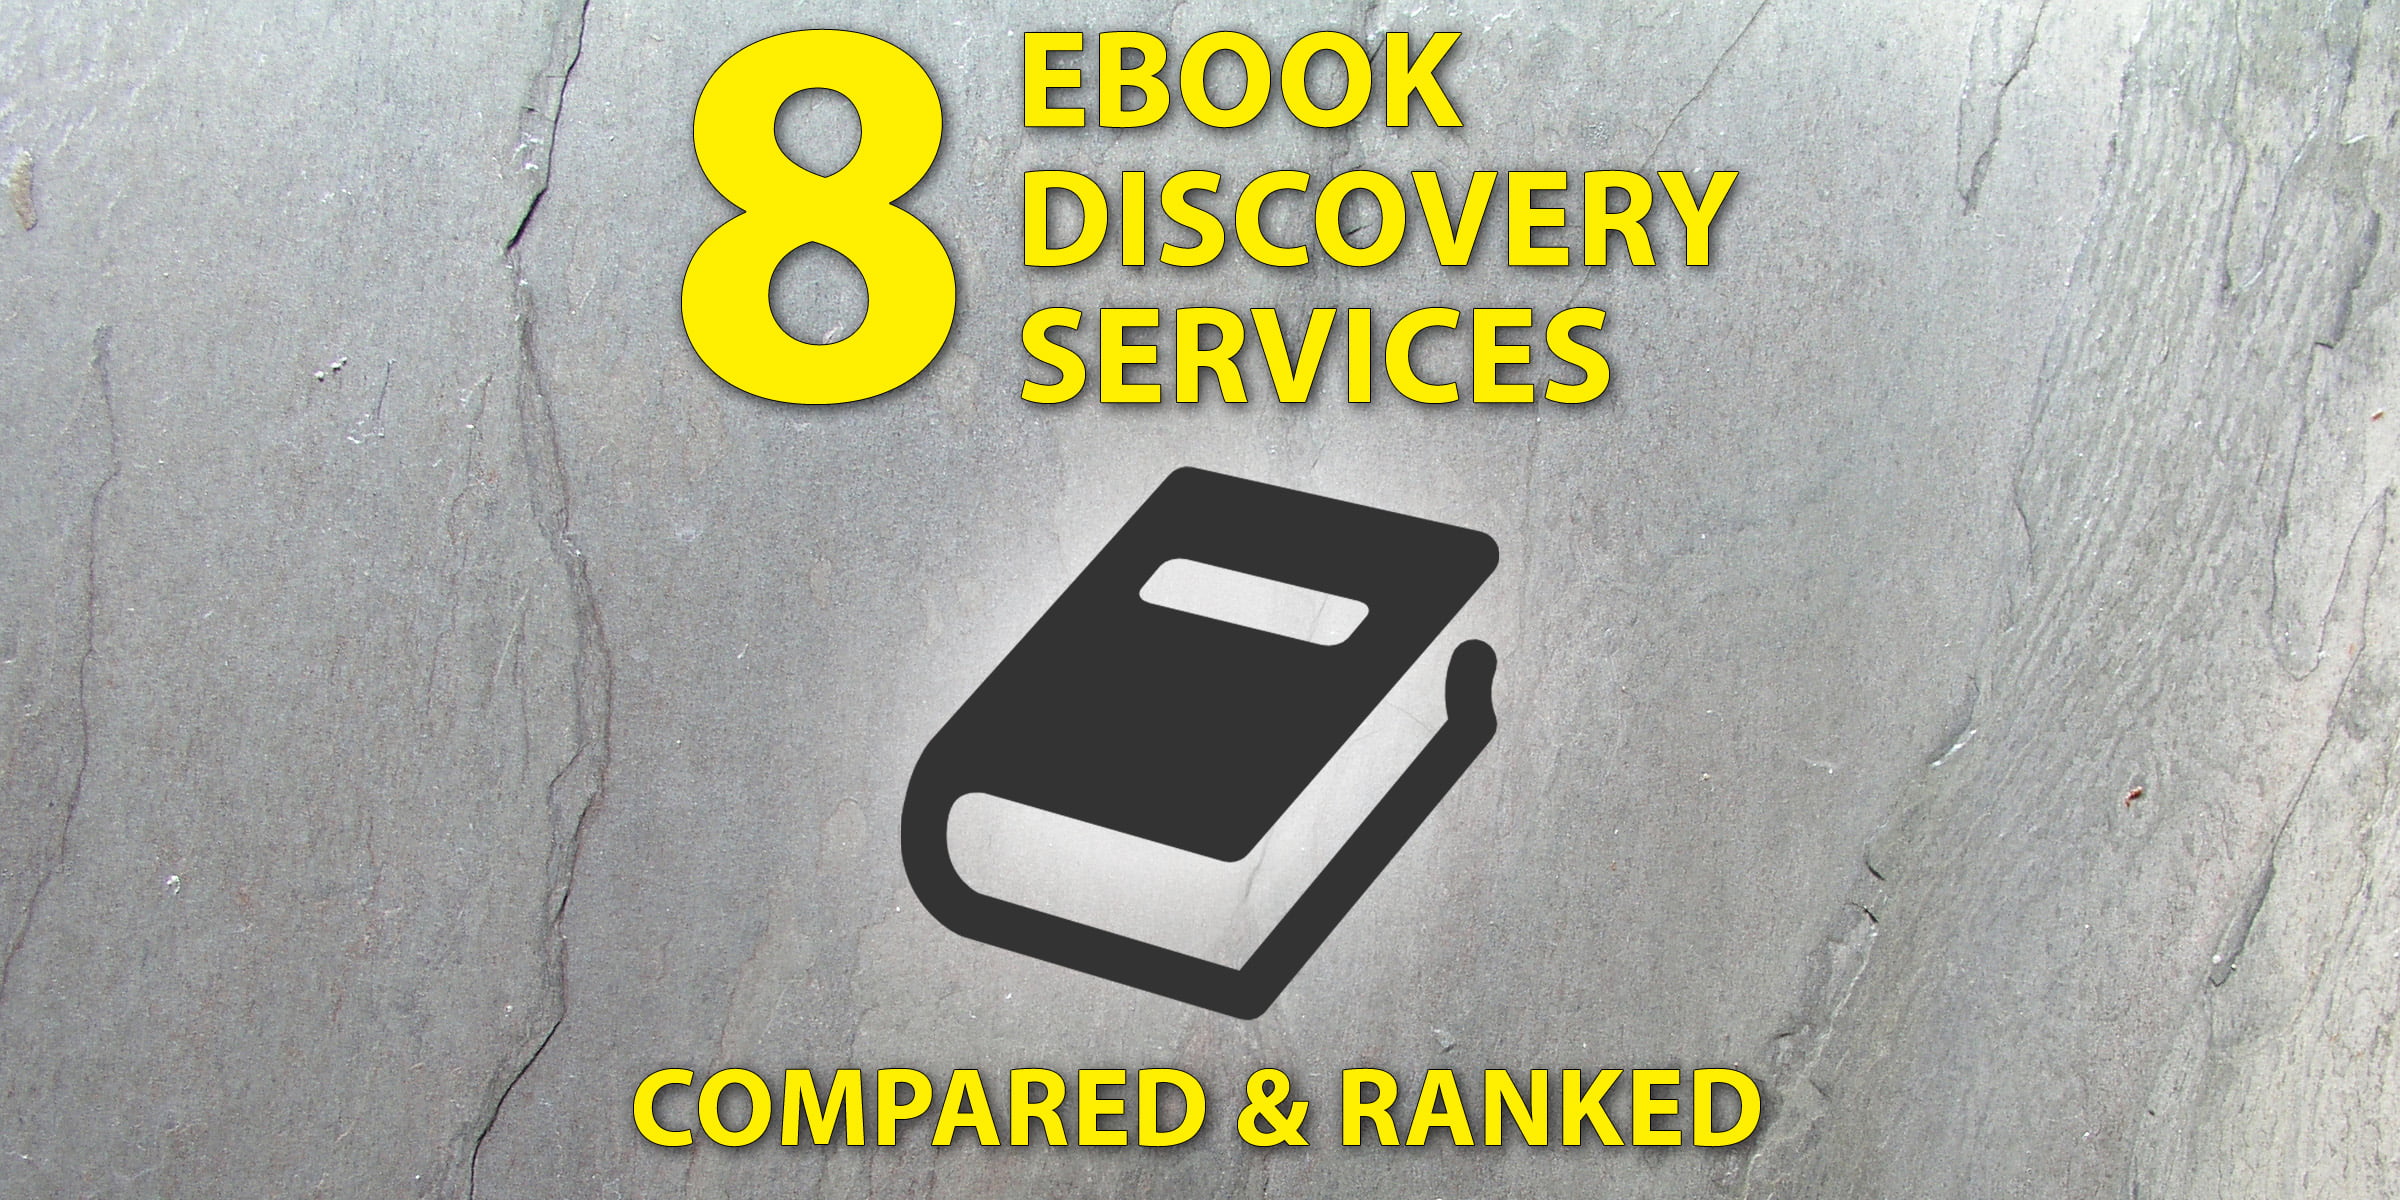 8 Ebook Discovery Services Compared